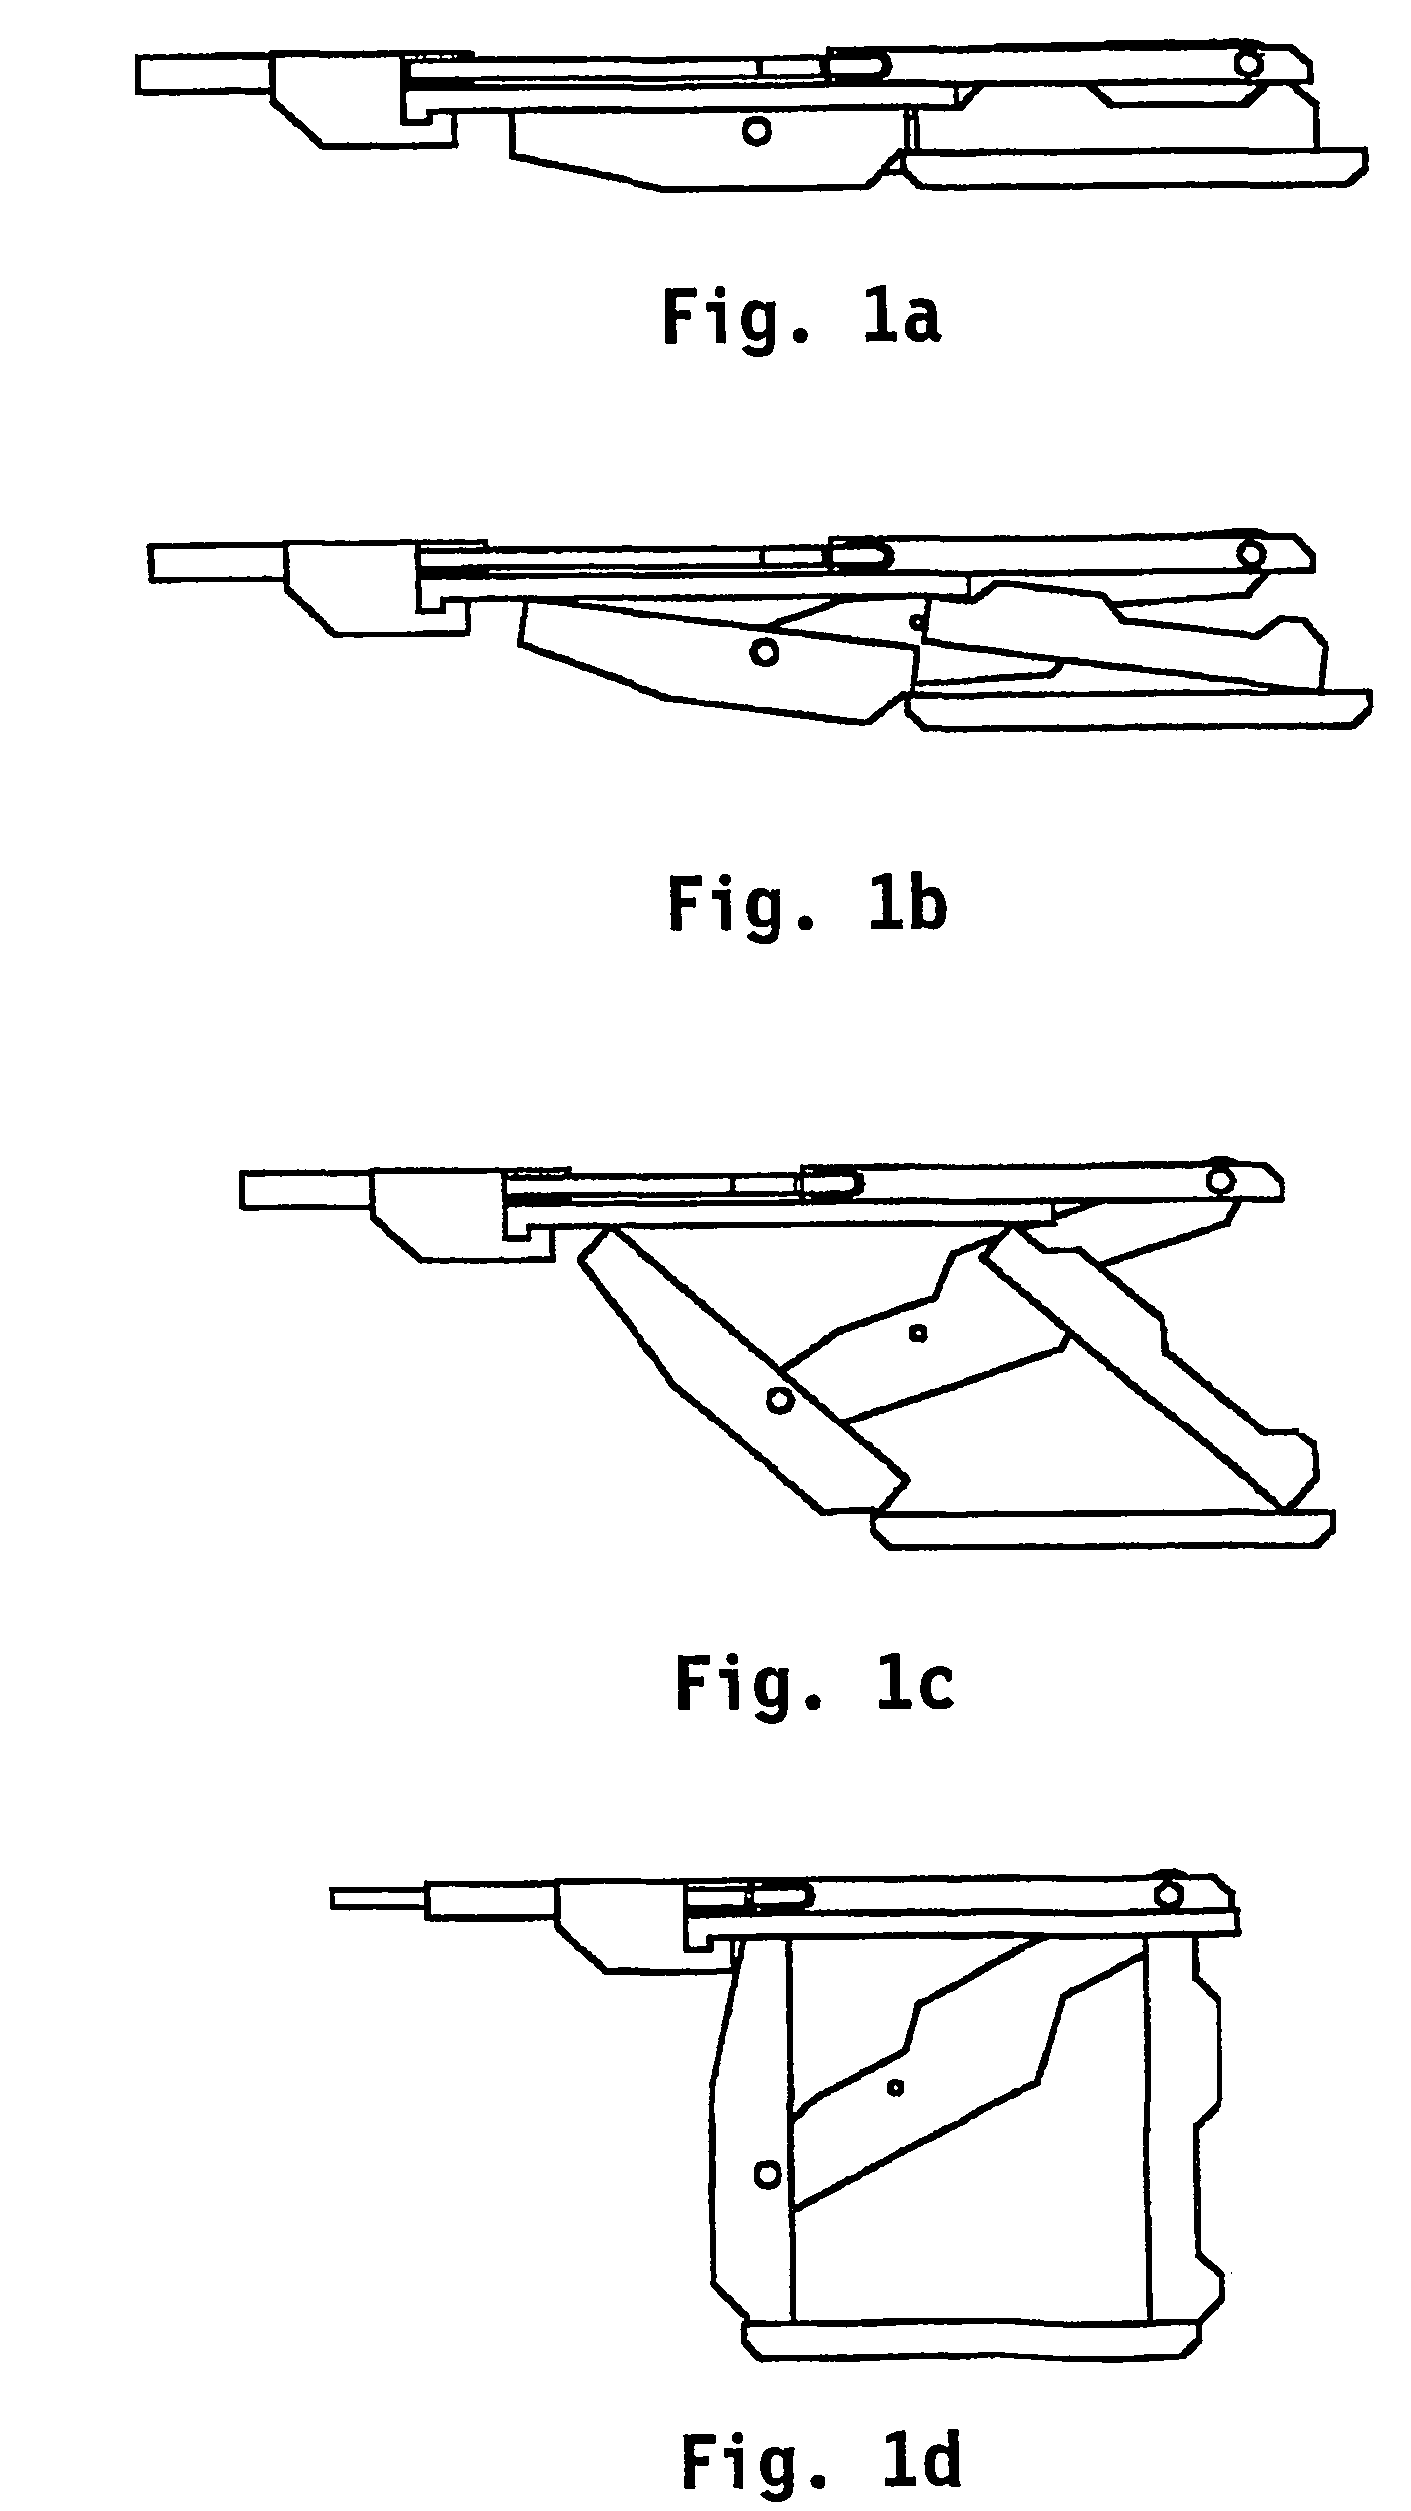 Collapsible and expandable instrument for insertion in a dorsal vertebra